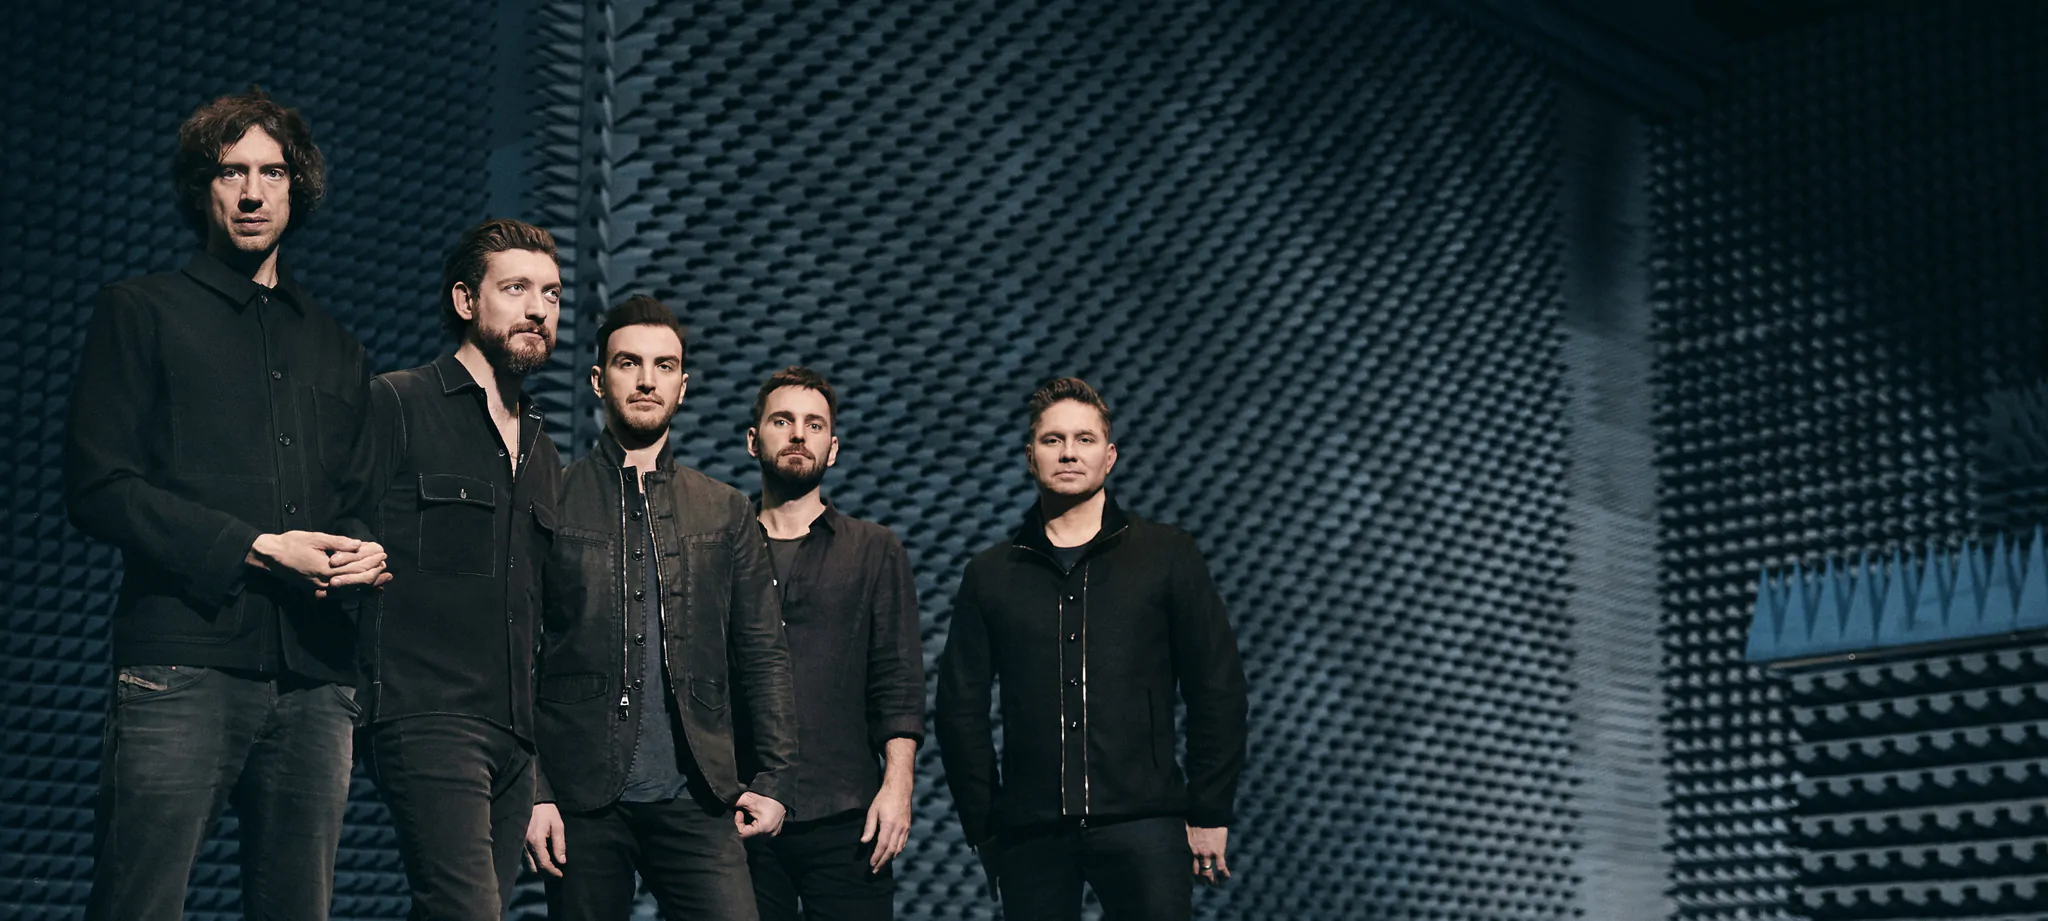 SNOW PATROL announce headline show at Sounds Of The City, Castlefield Bowl, Manchester for Sunday 26th September 2021 